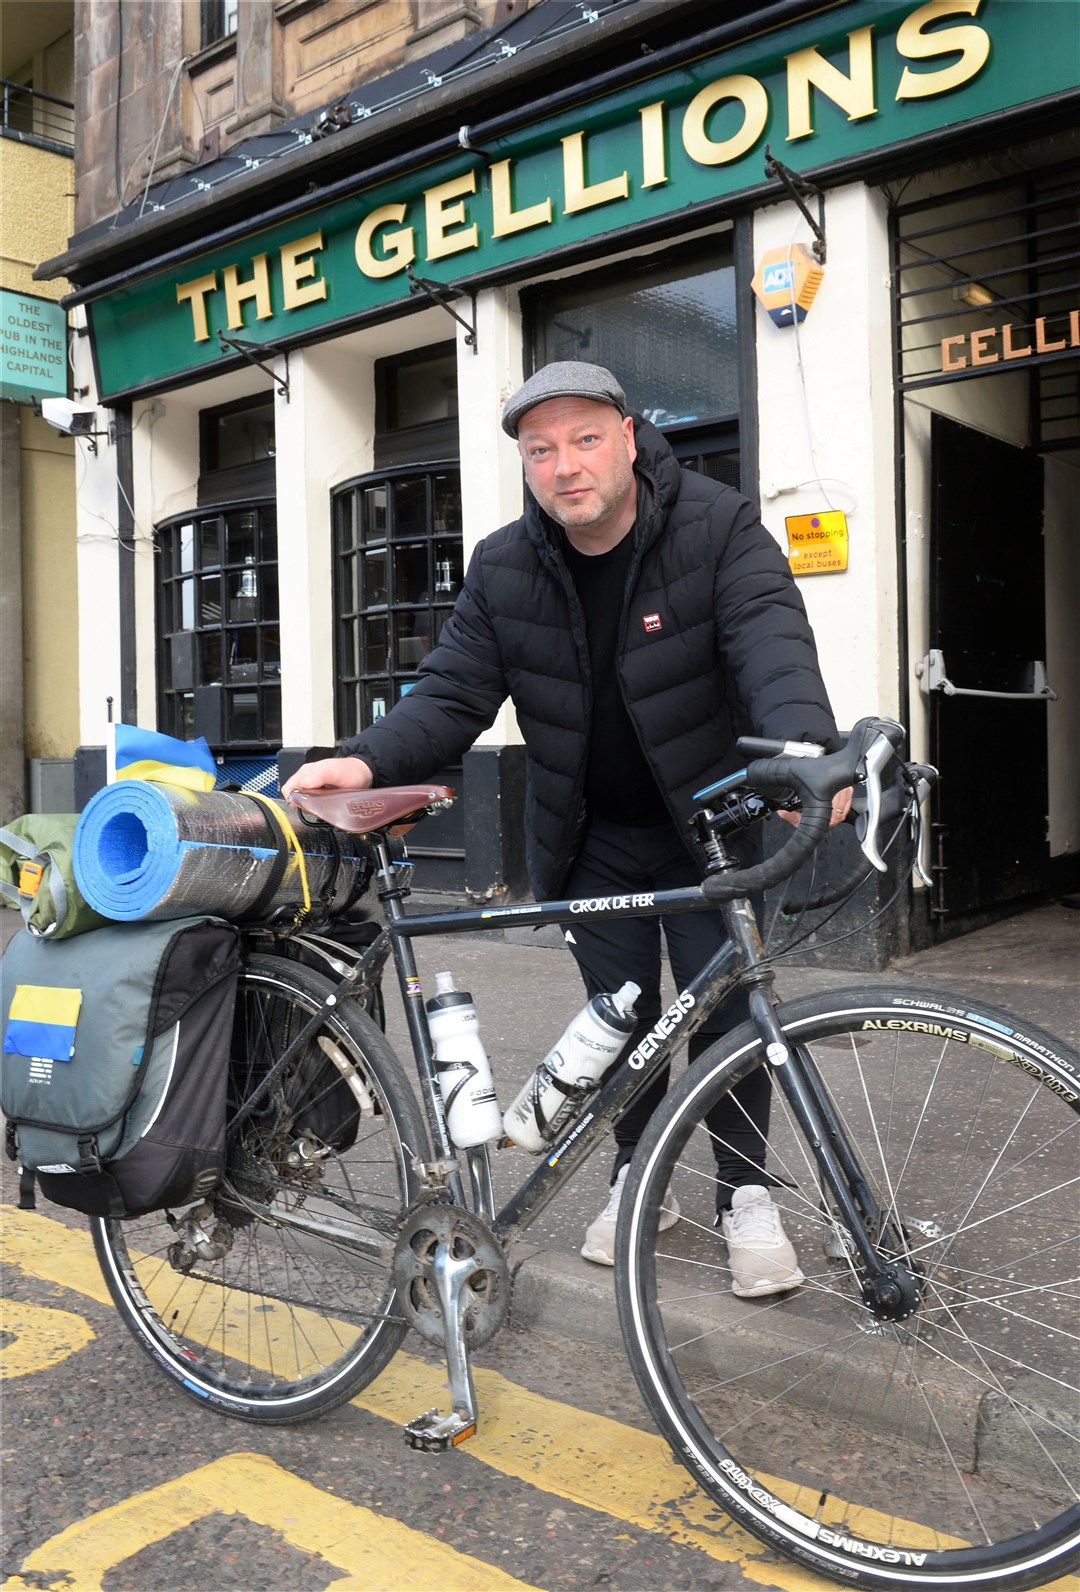 Alasdair Fraser before setting of his Gdansk to The Gellions fundraising cycle roadtrip for Urkraine. Picture: Gary Anthony